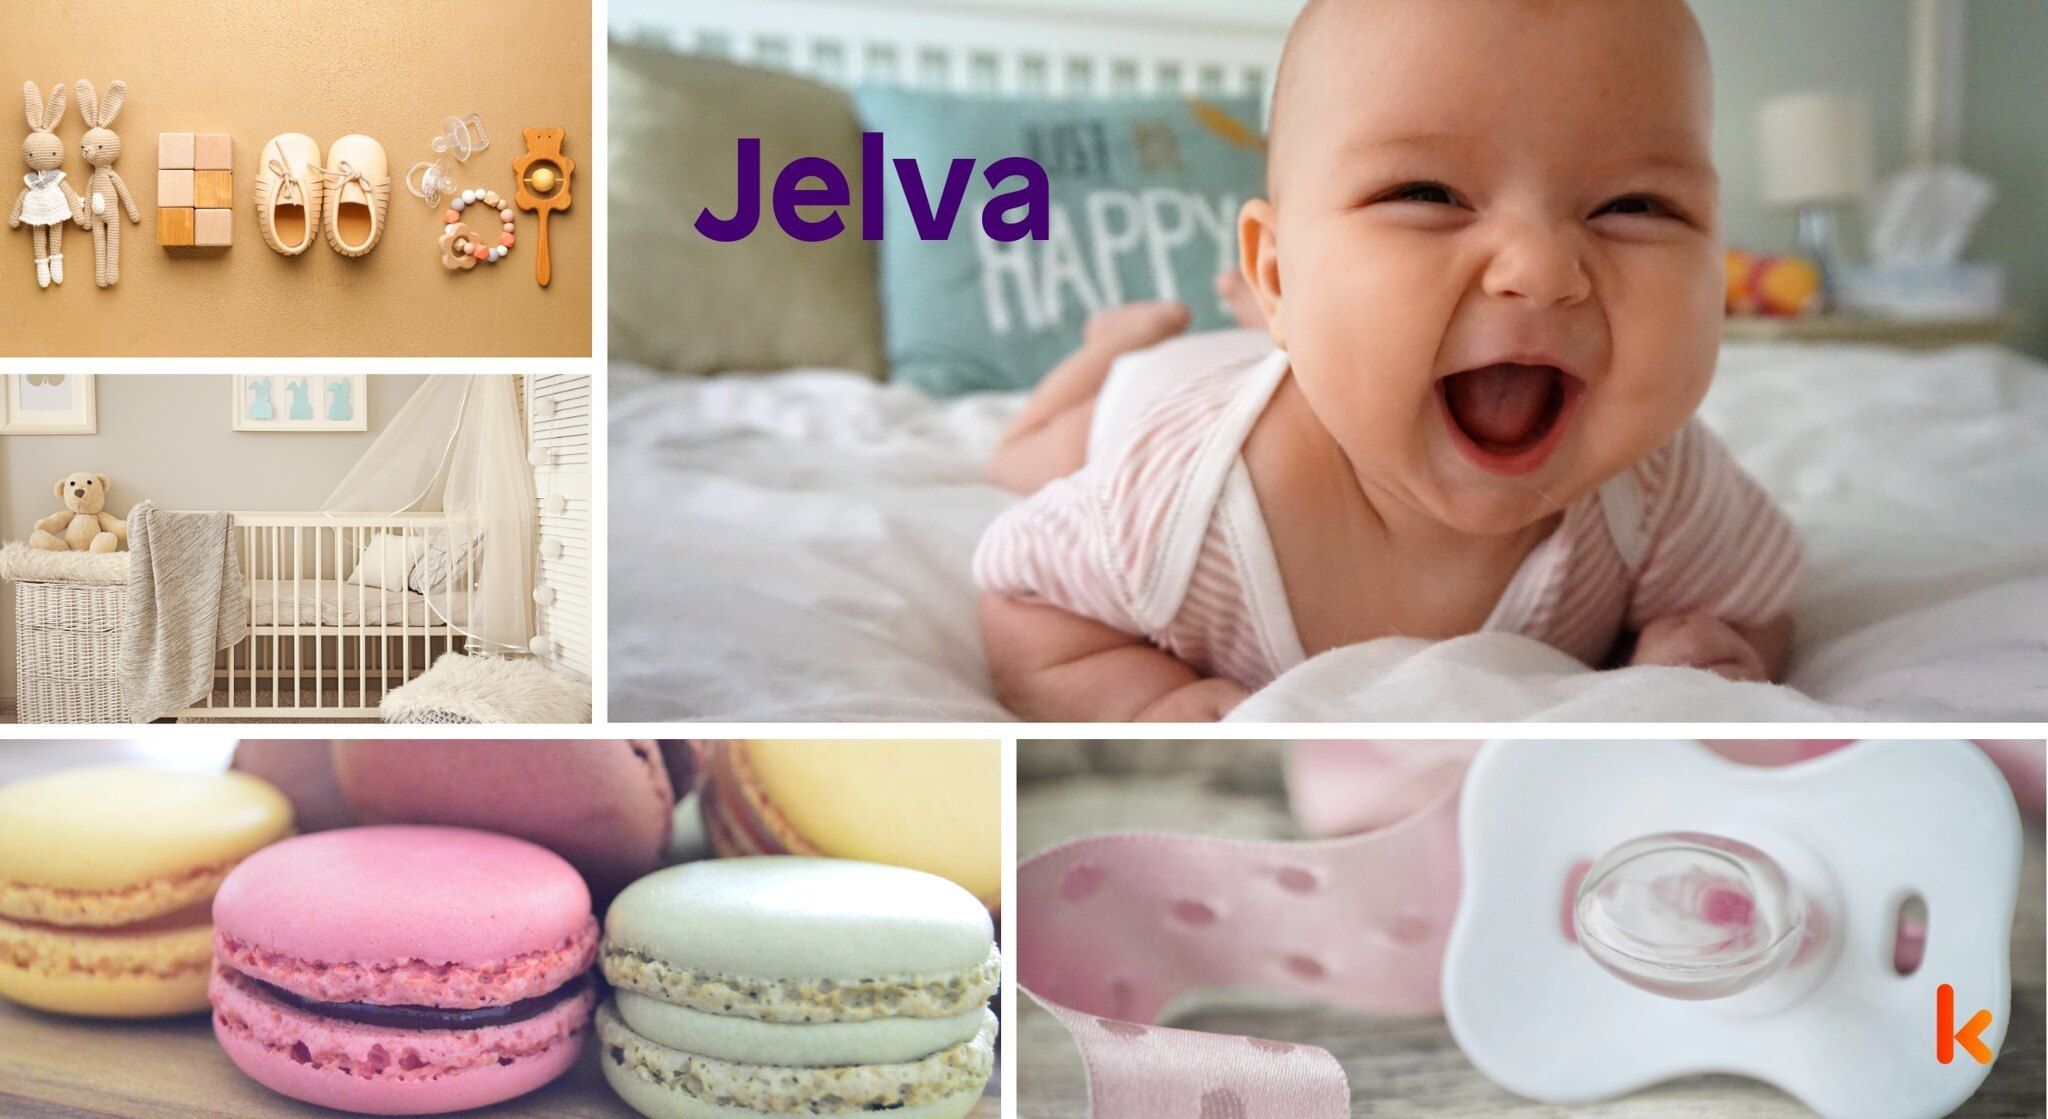 Meaning of the name Jelva